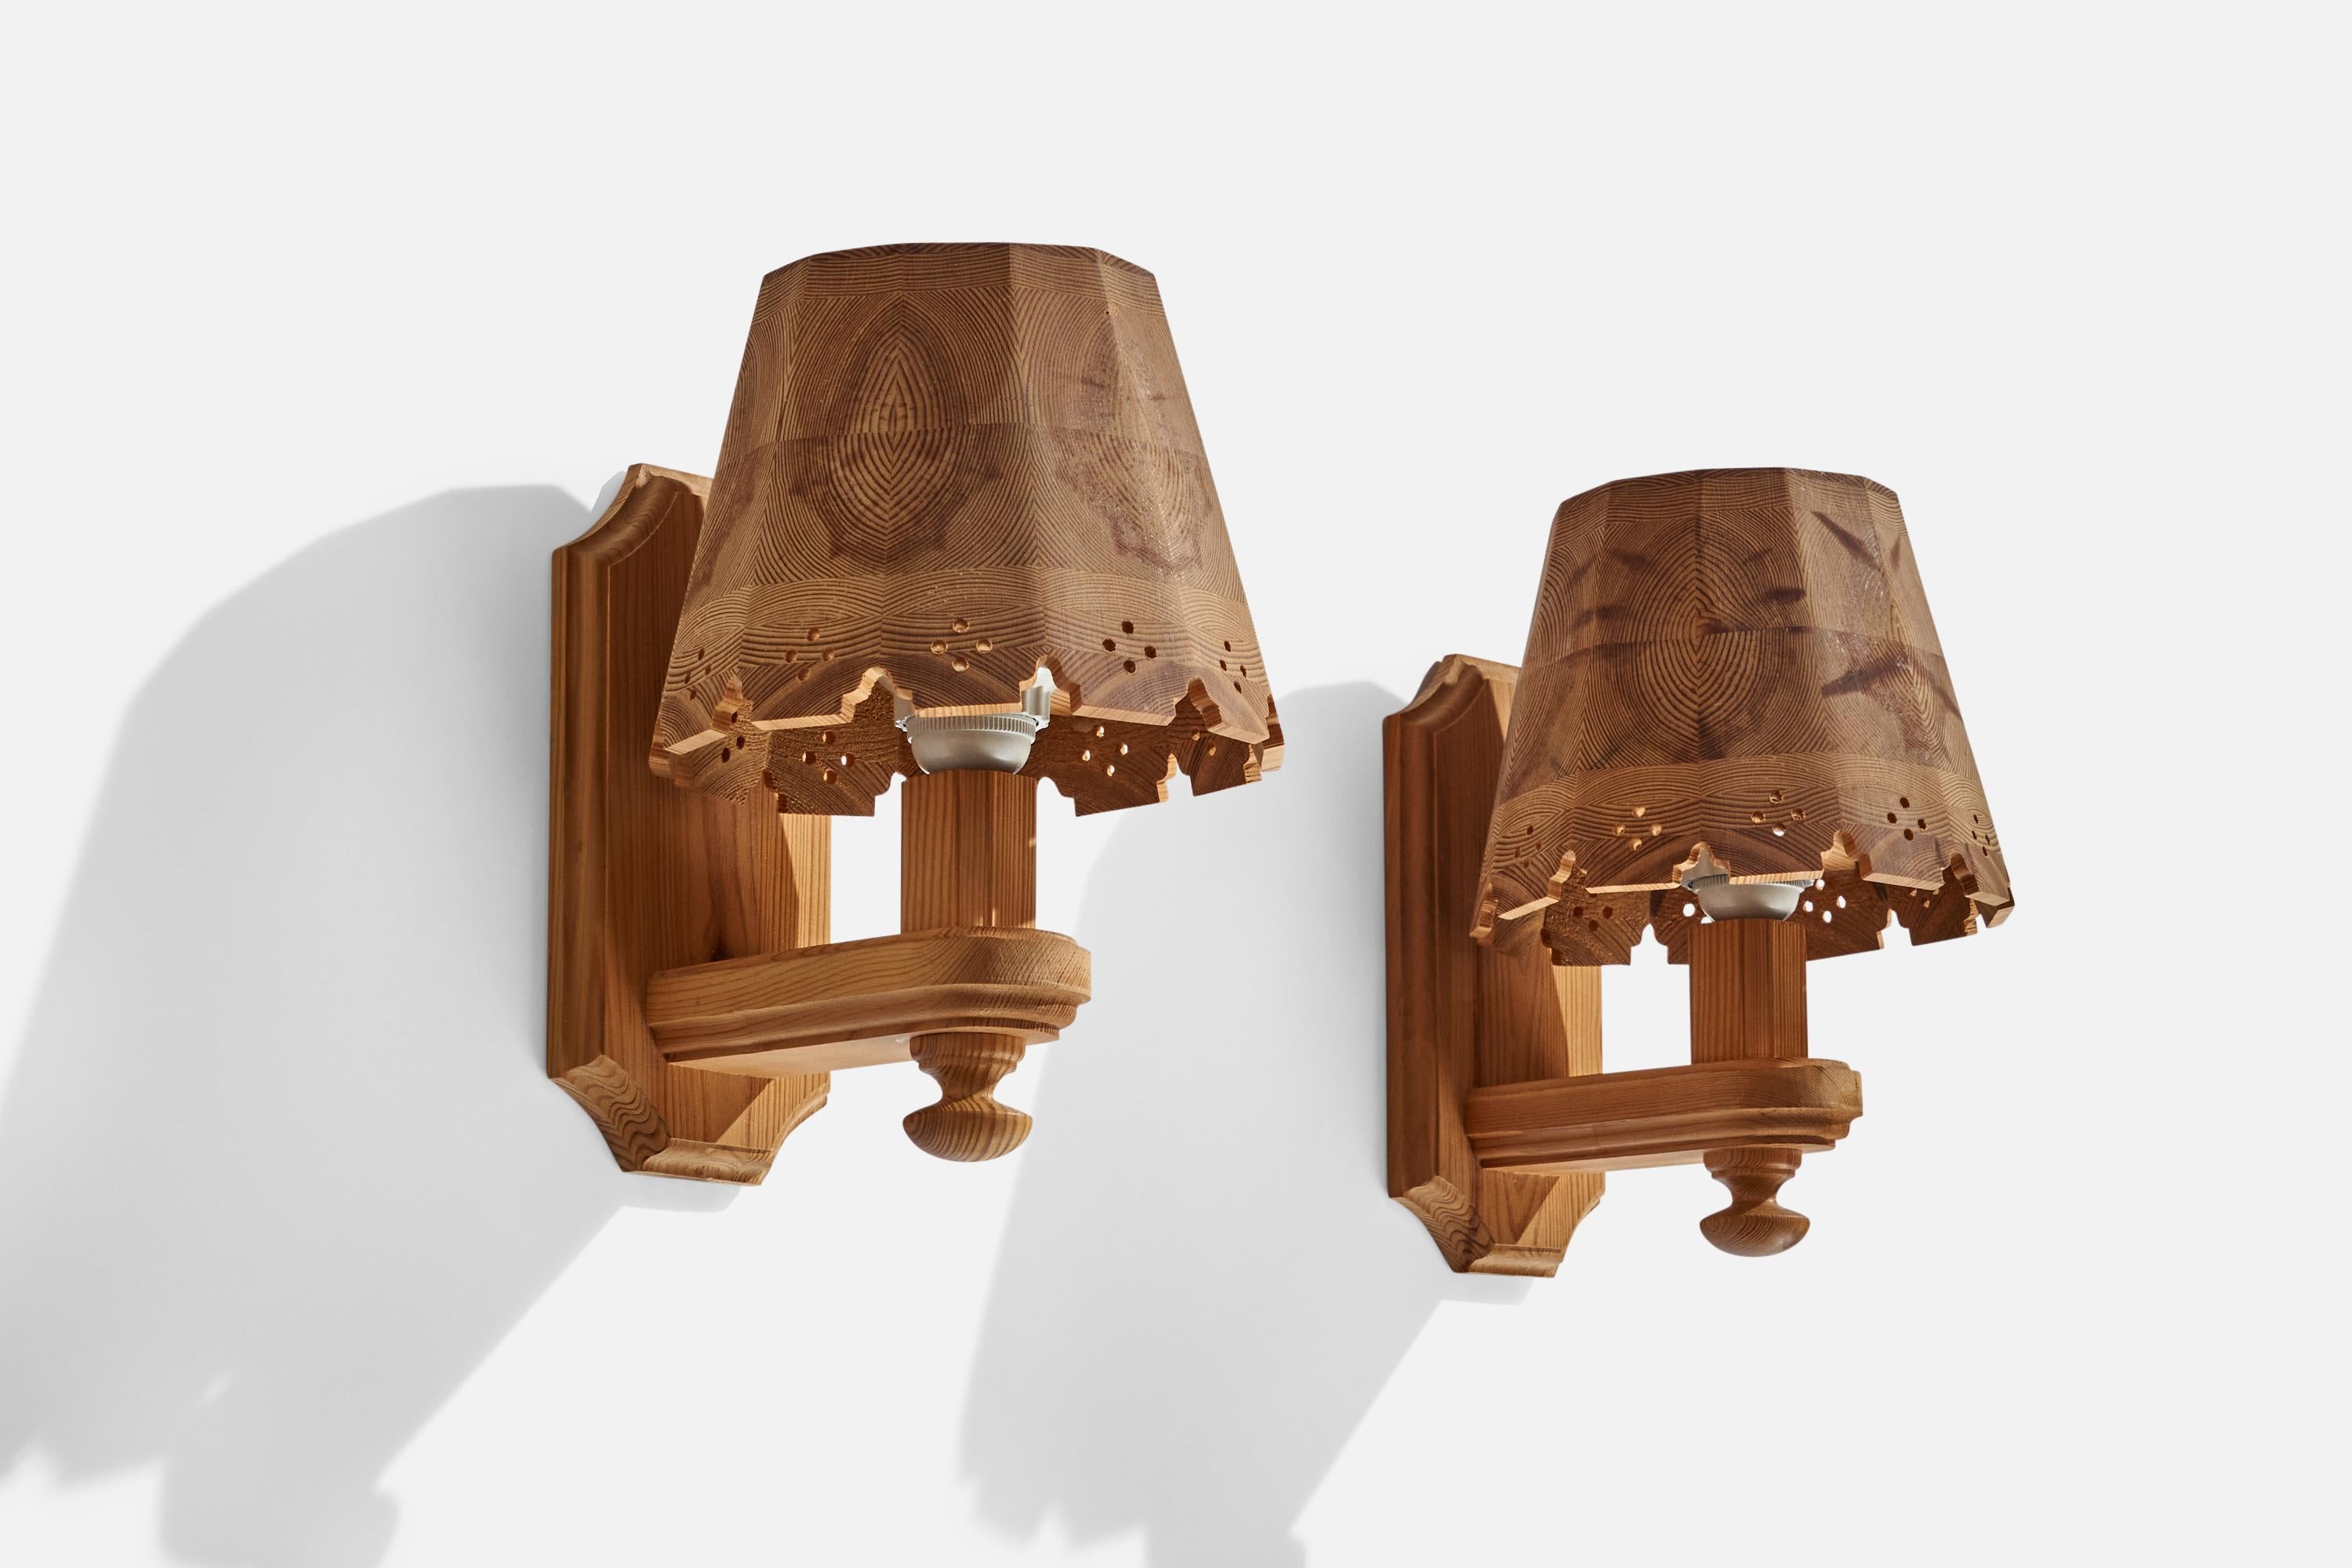 A pair of pine wall lights designed and produced in Sweden, c. 1970s.

Overall Dimensions (inches): 7.75” H x 7.5” W x 10.5” D
Back Plate Dimensions (inches): 9.5” H x 4.25” W x 0.70” D
Bulb Specifications: E-26 Bulb
Number of Sockets: 2
All